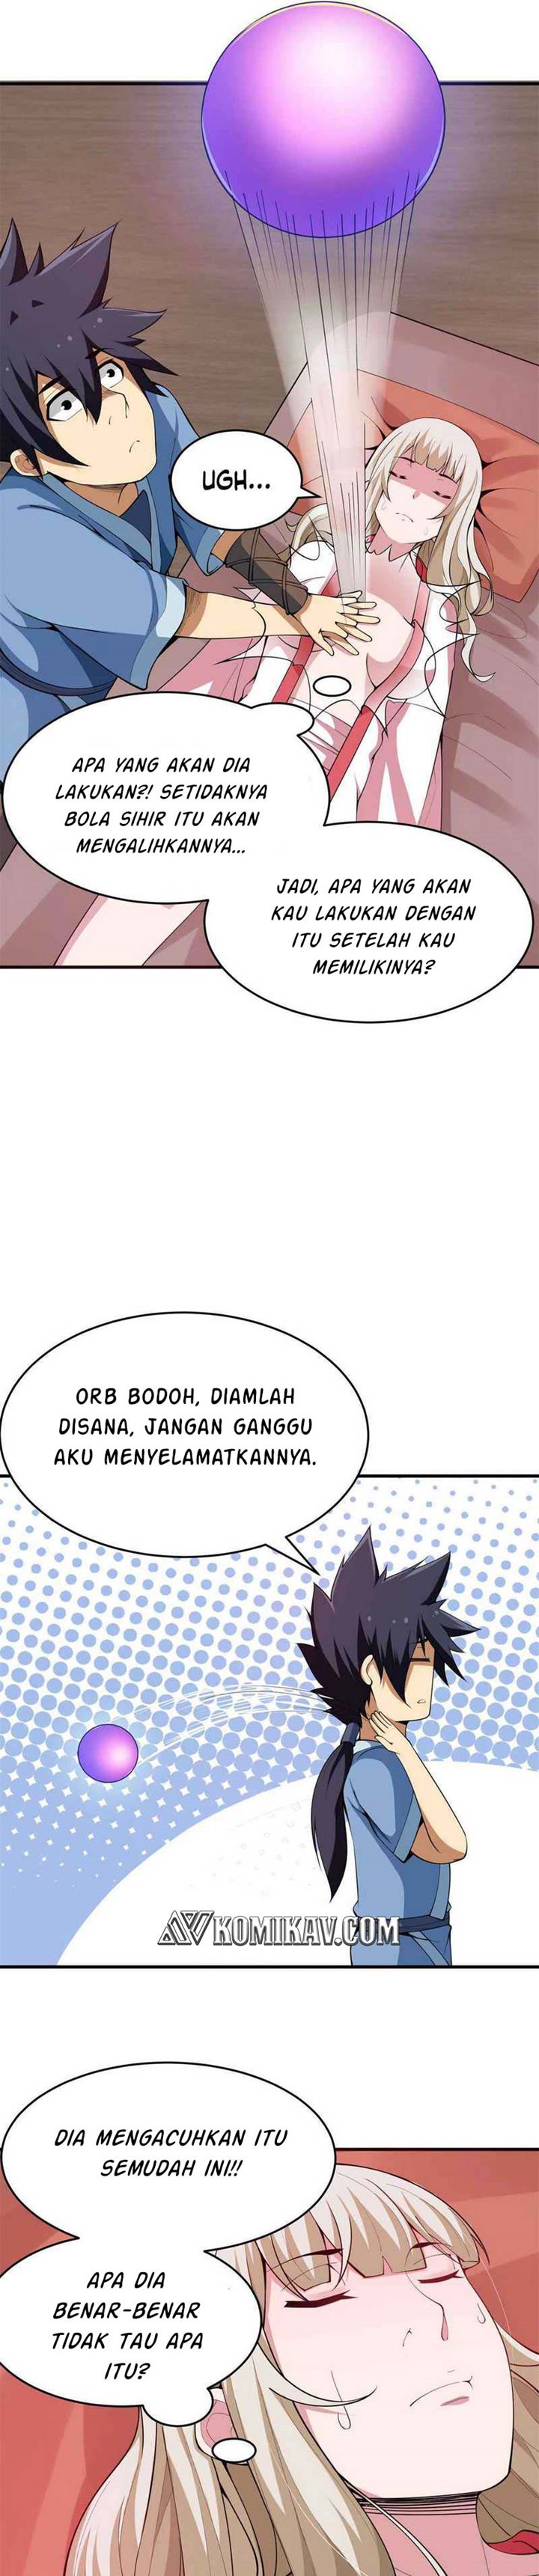 Dilarang COPAS - situs resmi www.mangacanblog.com - Komik i just want to be beaten to death by everyone 020 - chapter 20 21 Indonesia i just want to be beaten to death by everyone 020 - chapter 20 Terbaru 10|Baca Manga Komik Indonesia|Mangacan